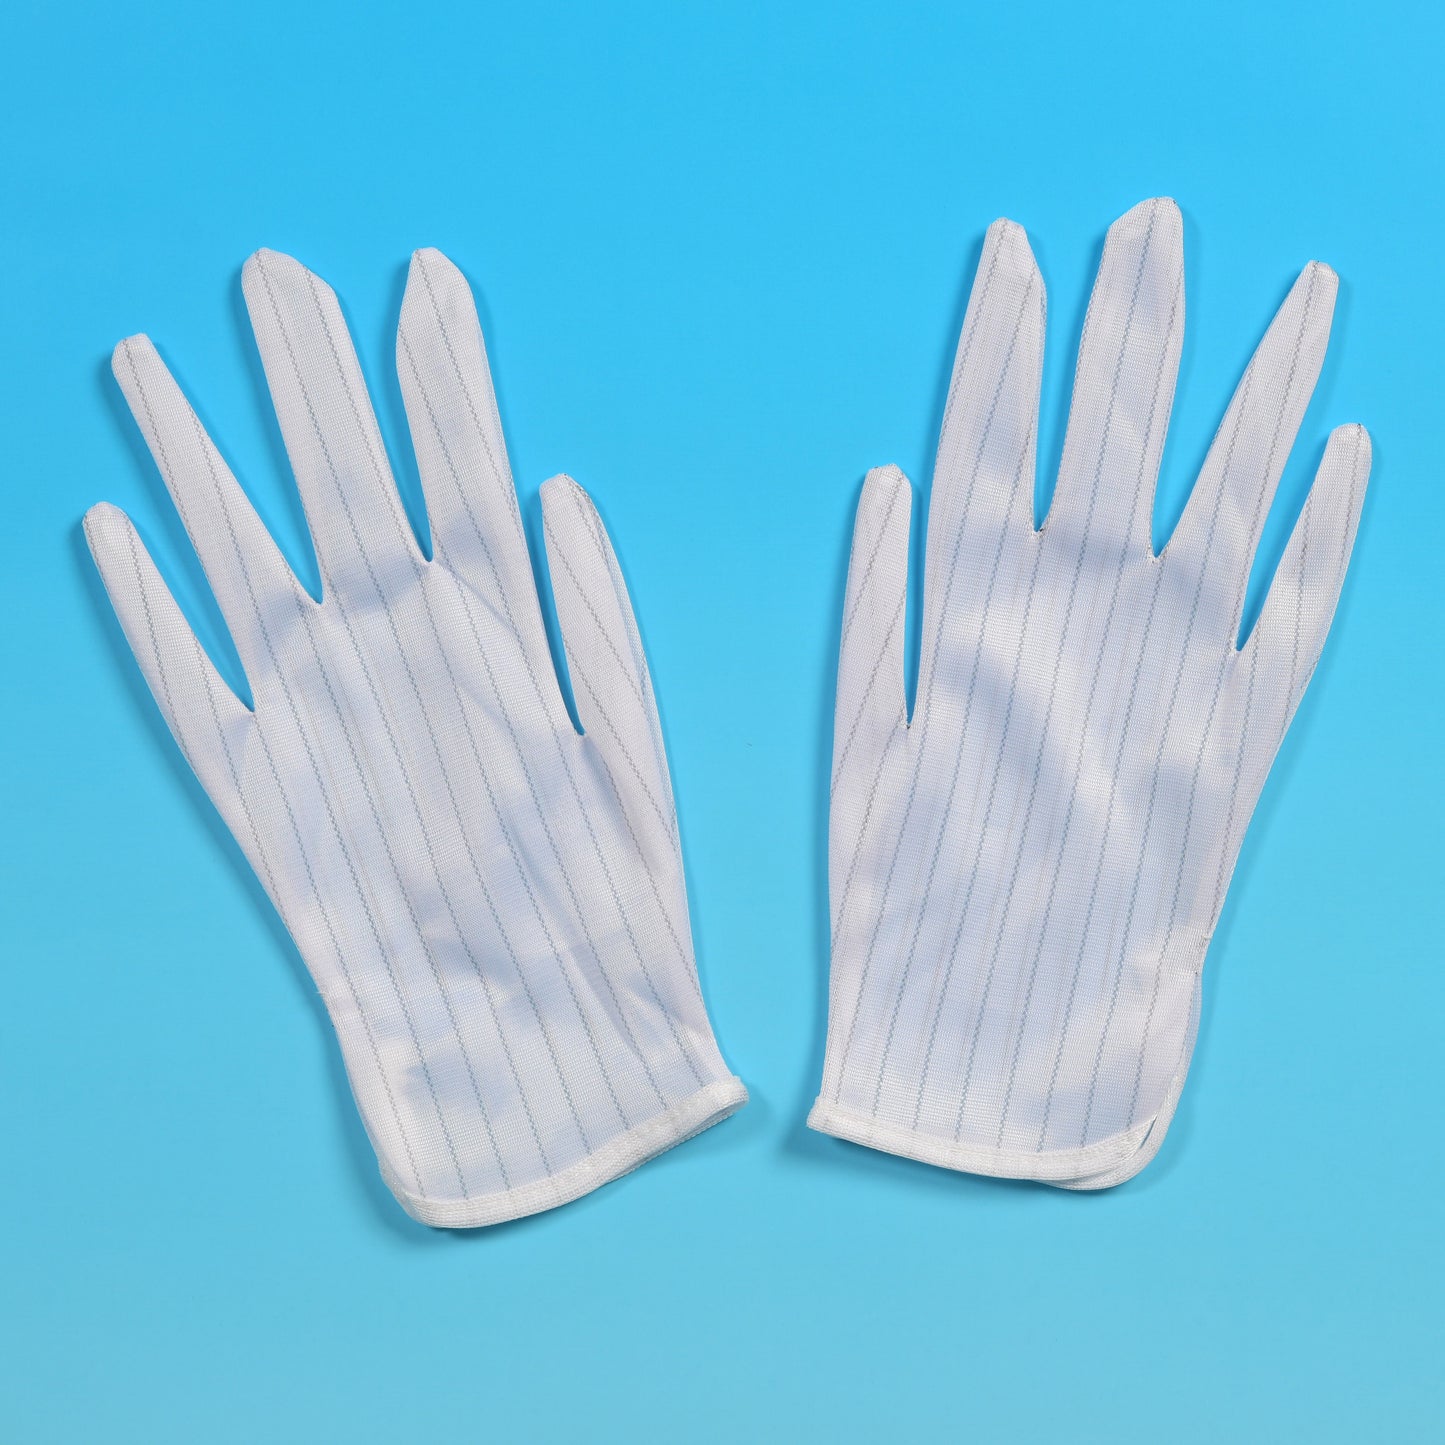 striped anti -static gloves, cleanroom gloves suitable for dustless rooms and electronic assembly 10 Pairs